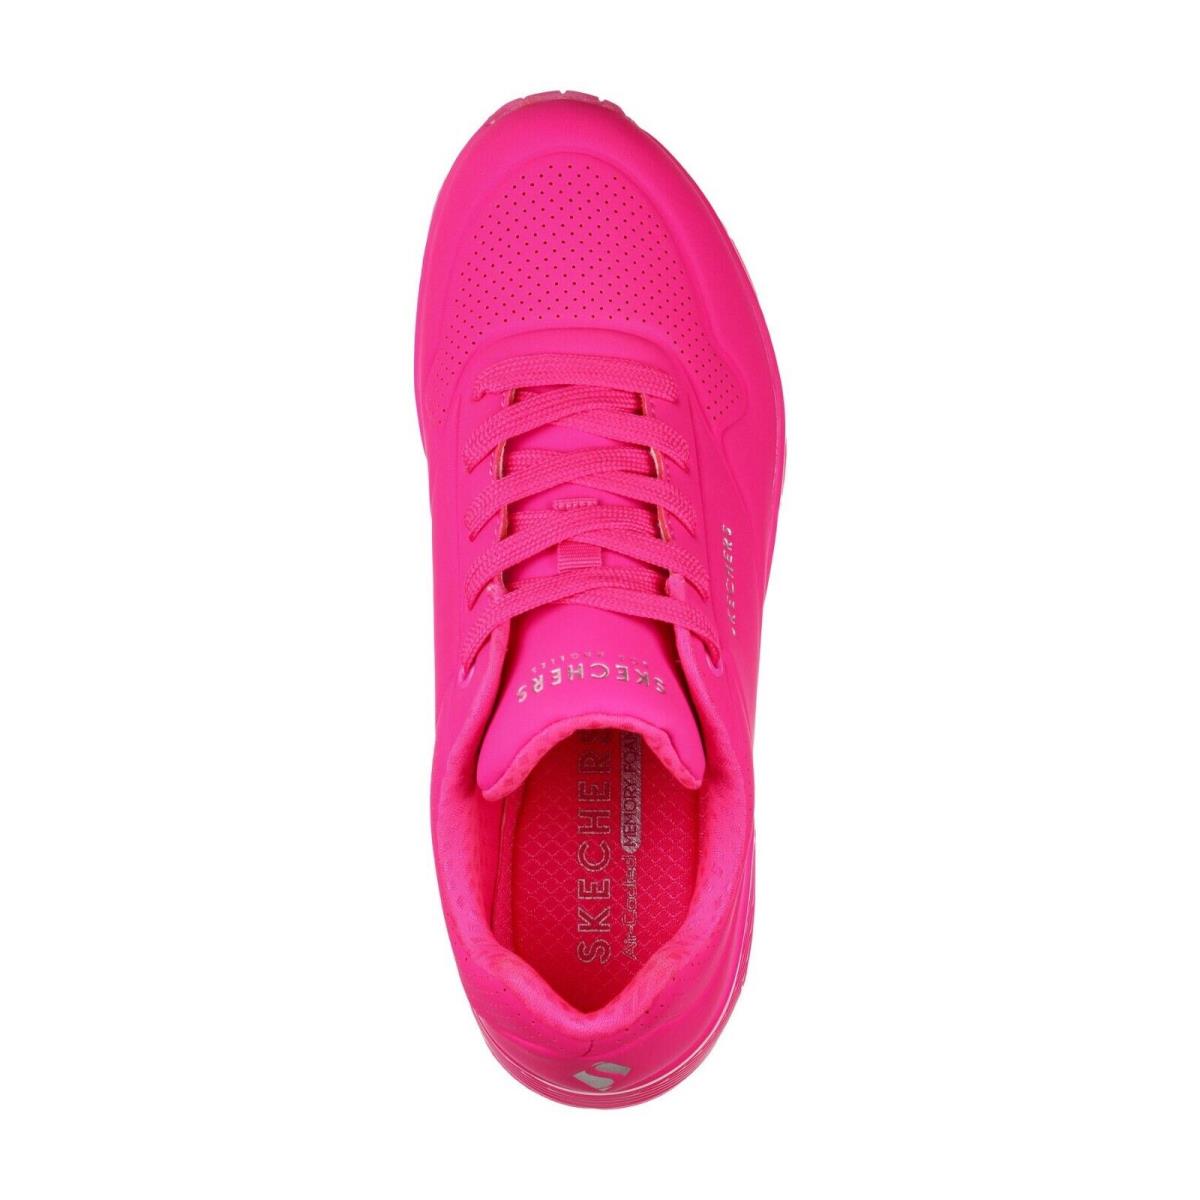 Skechers shoes Uno Night Shades - Hot Pink 13